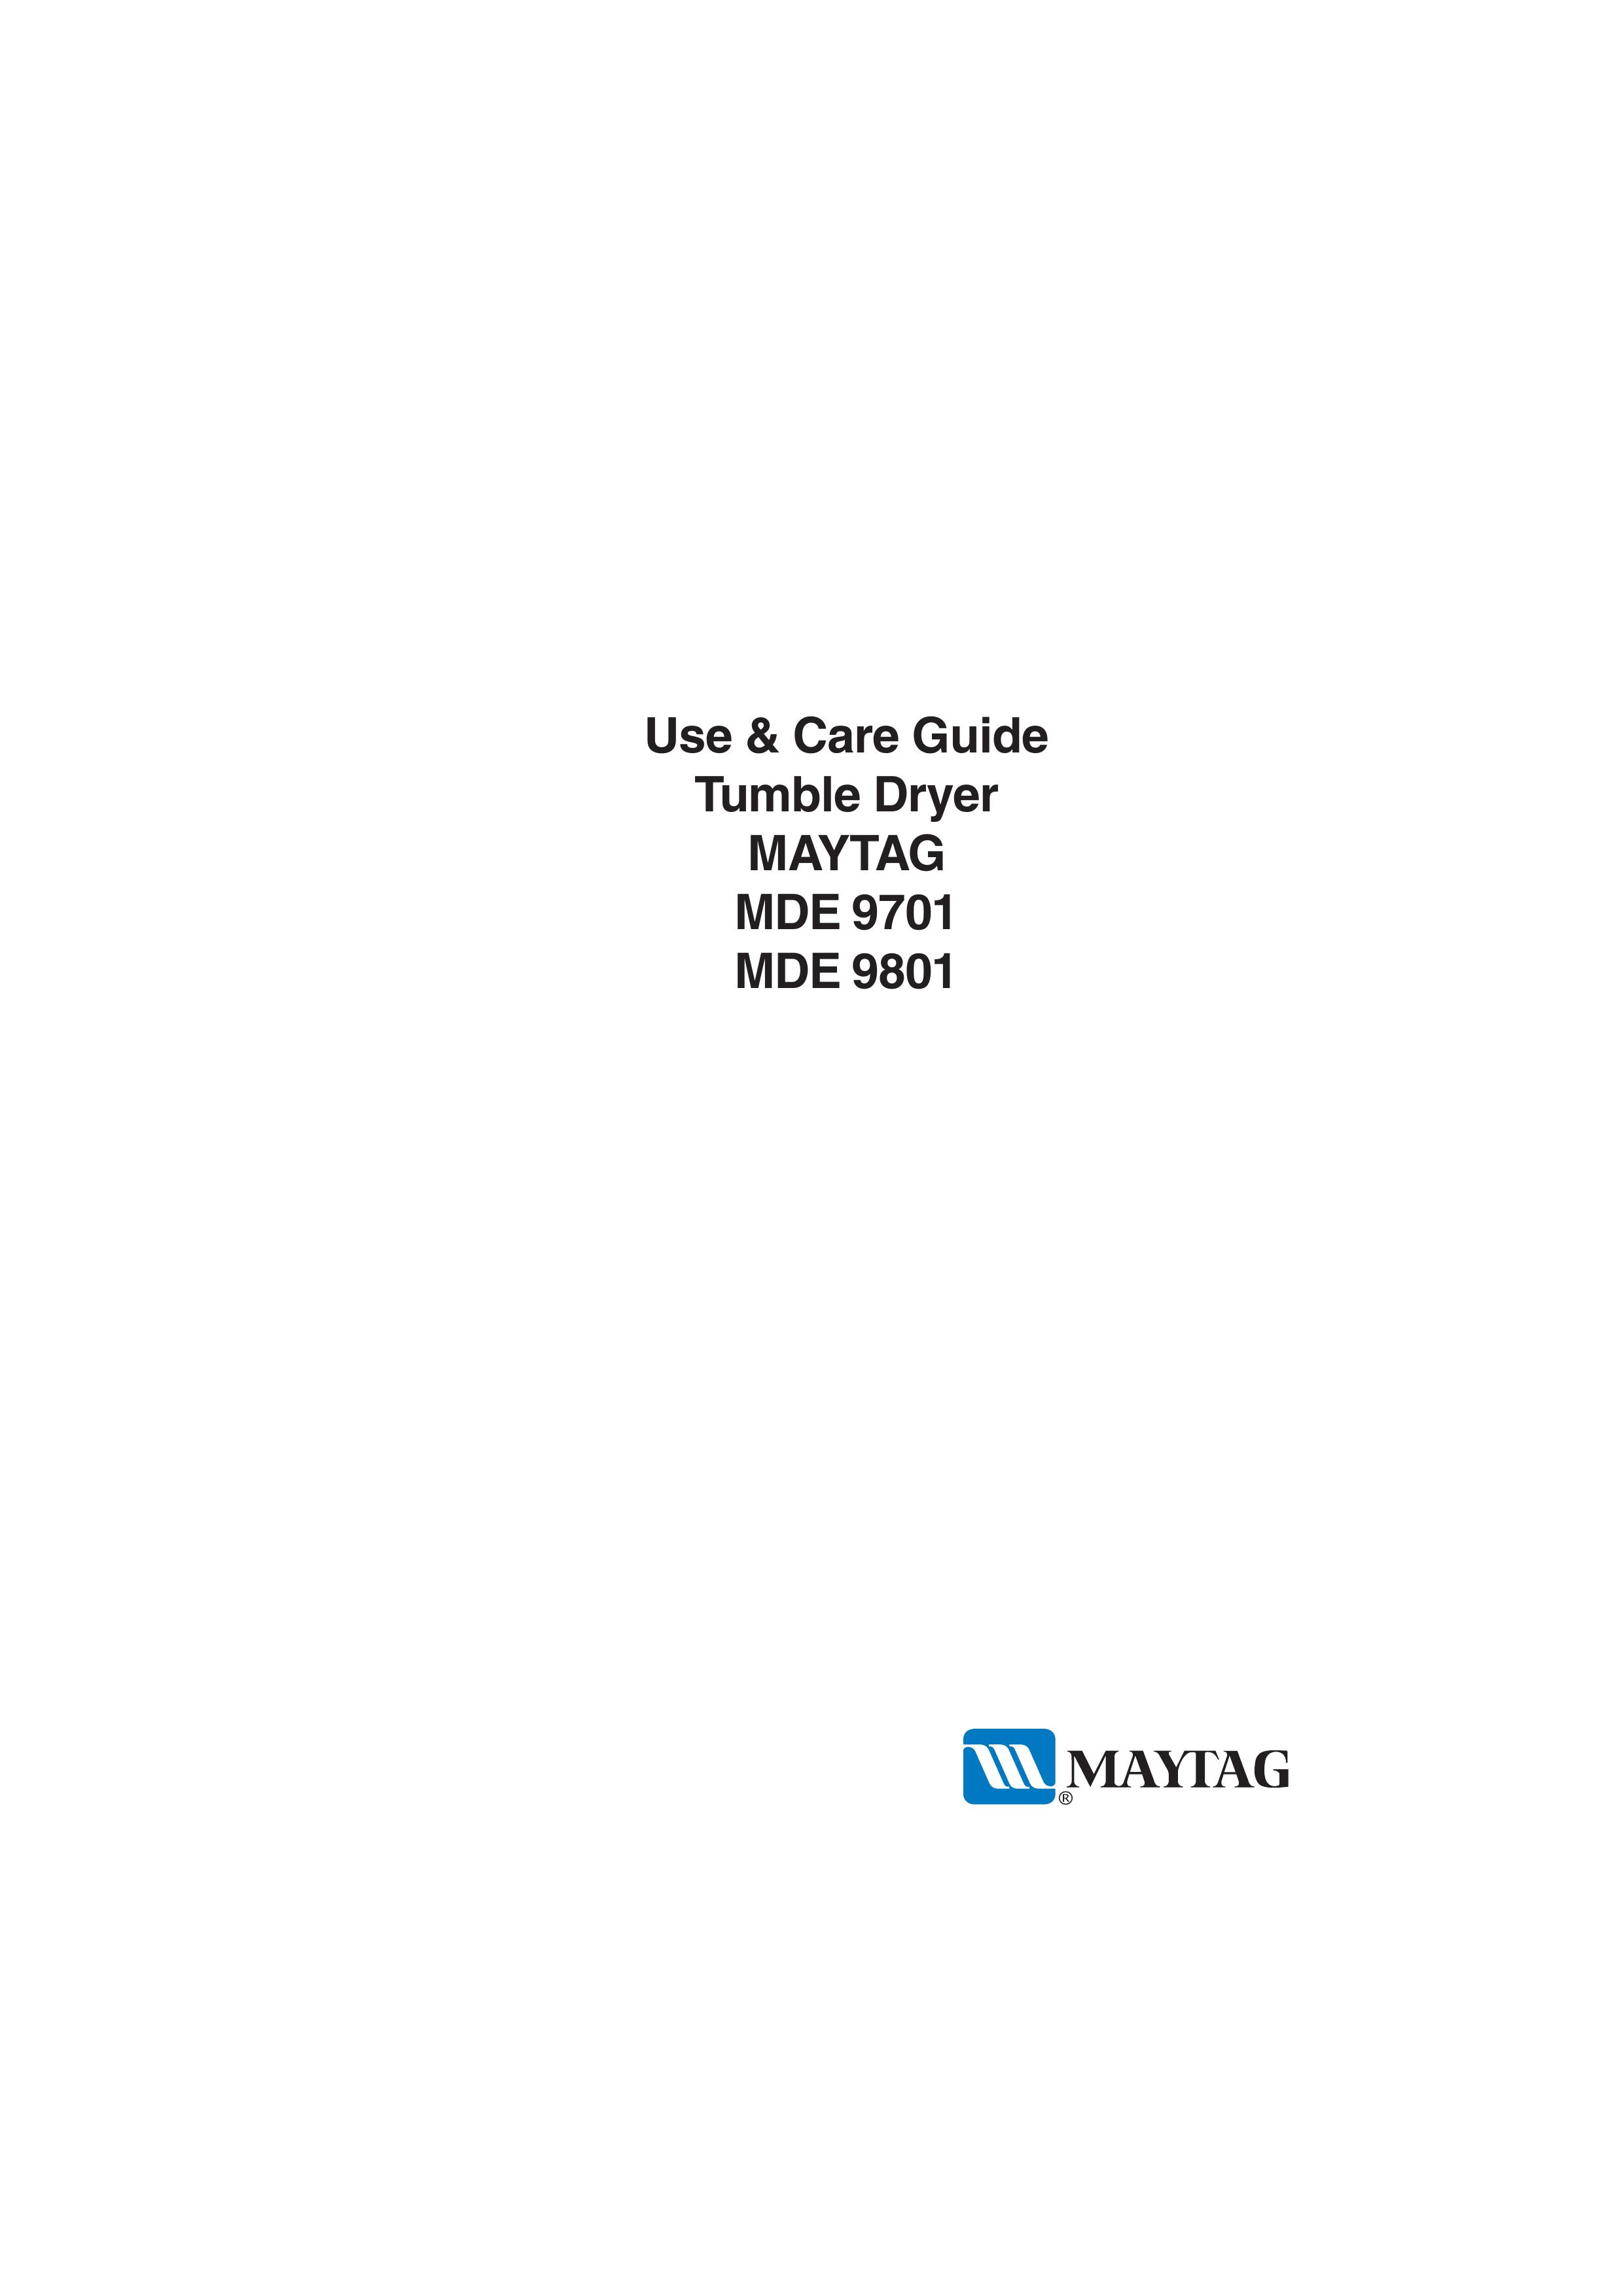 Maytag MDE 9801 Clothes Dryer User Manual